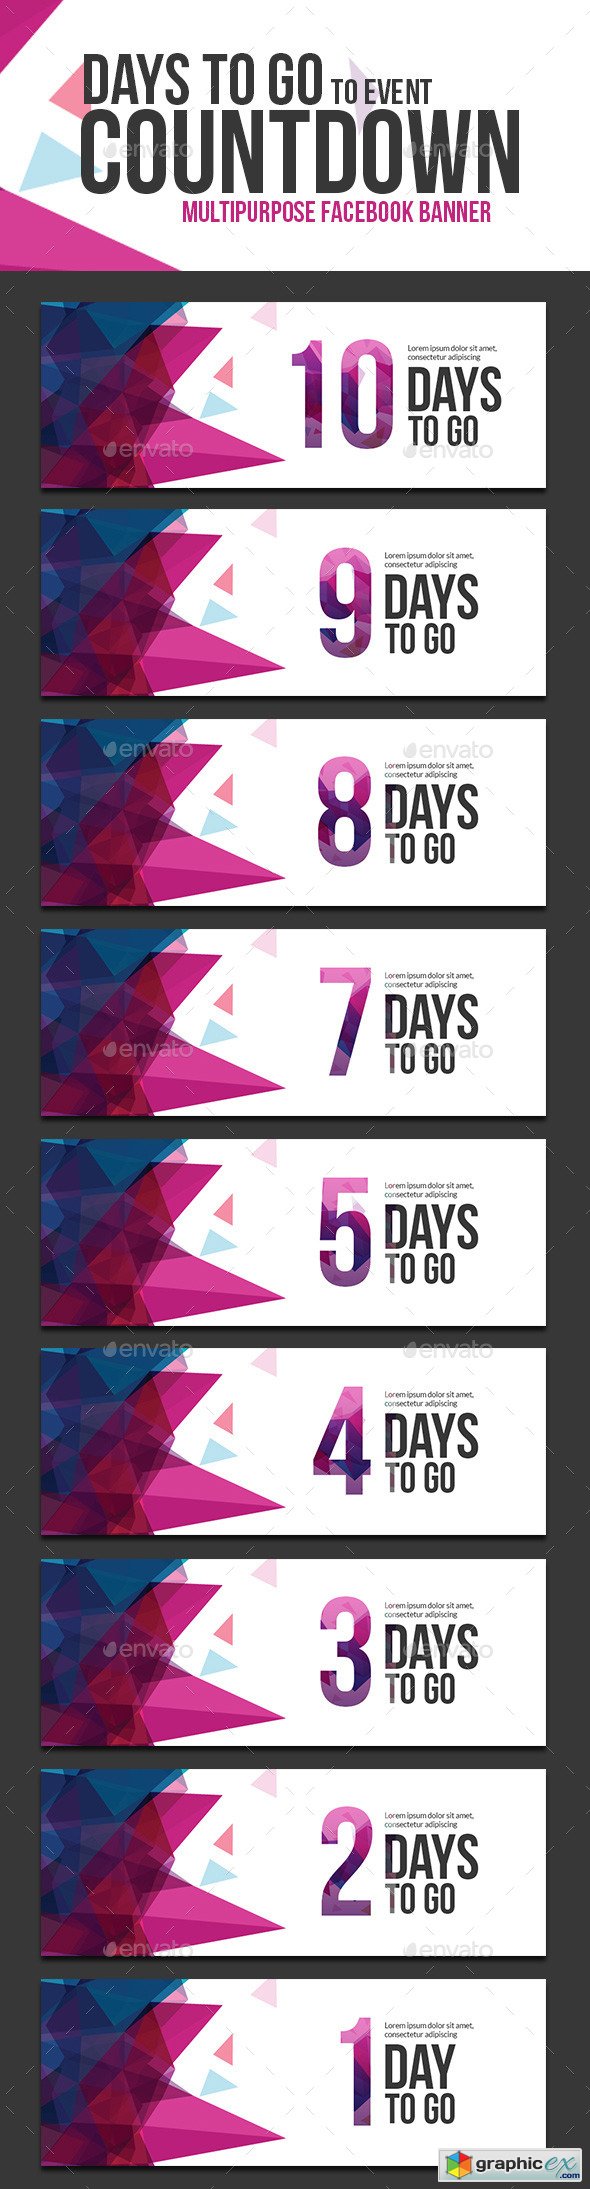 Days to go Countdown Banner